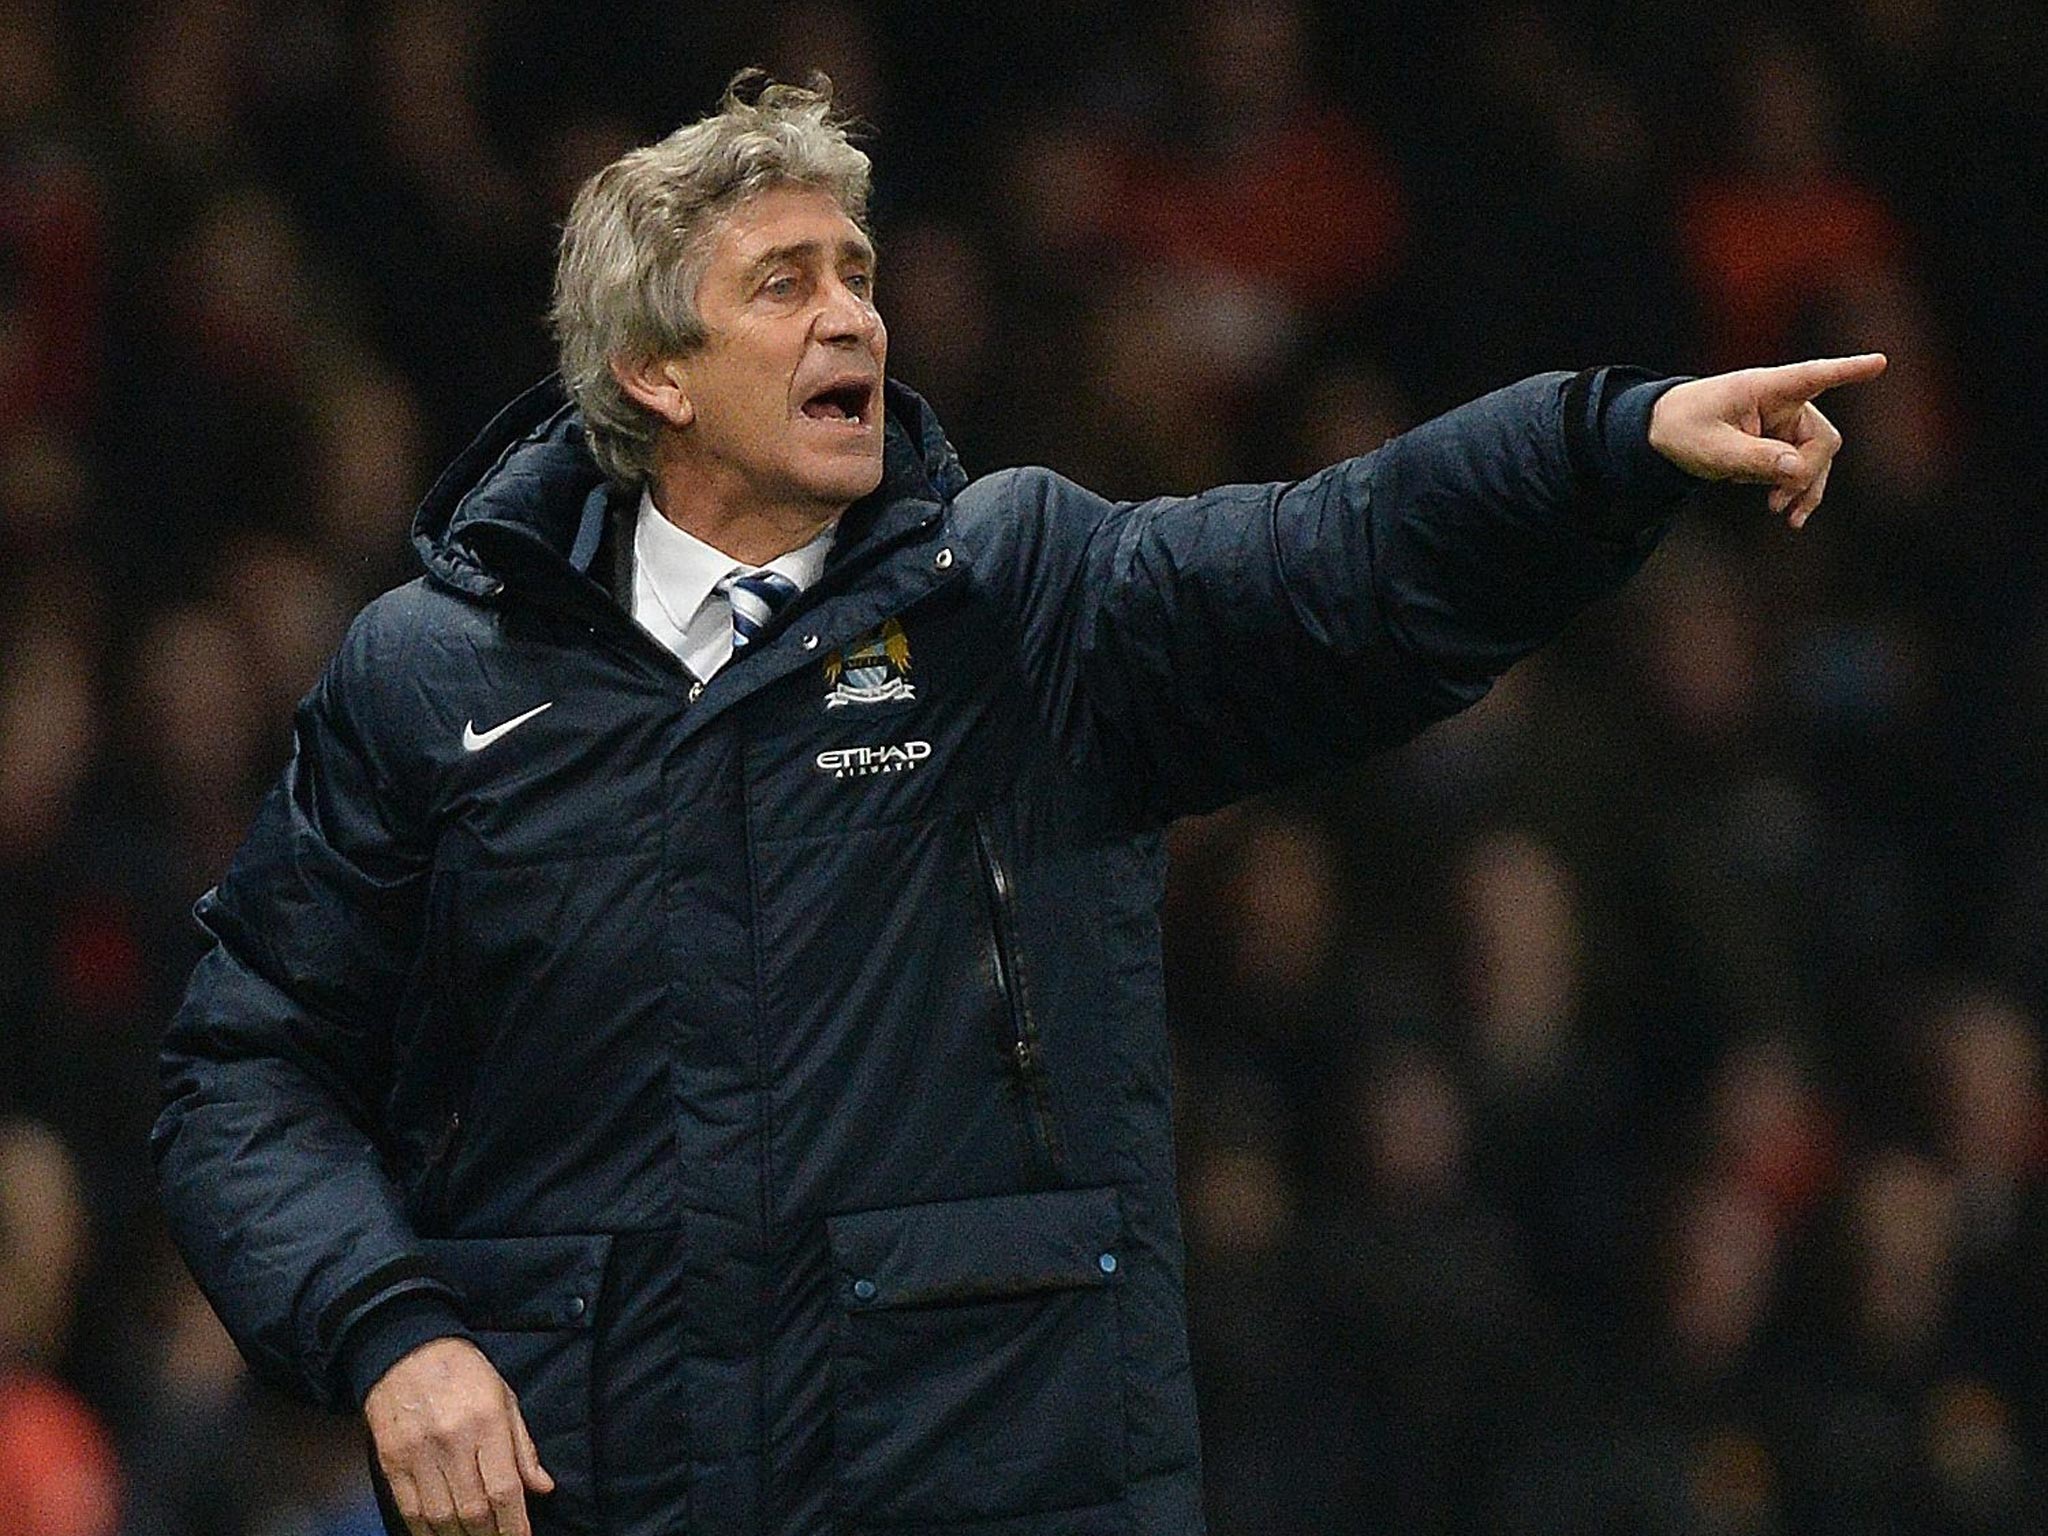 Manuel Pellegrini makes a gesture from the touchline